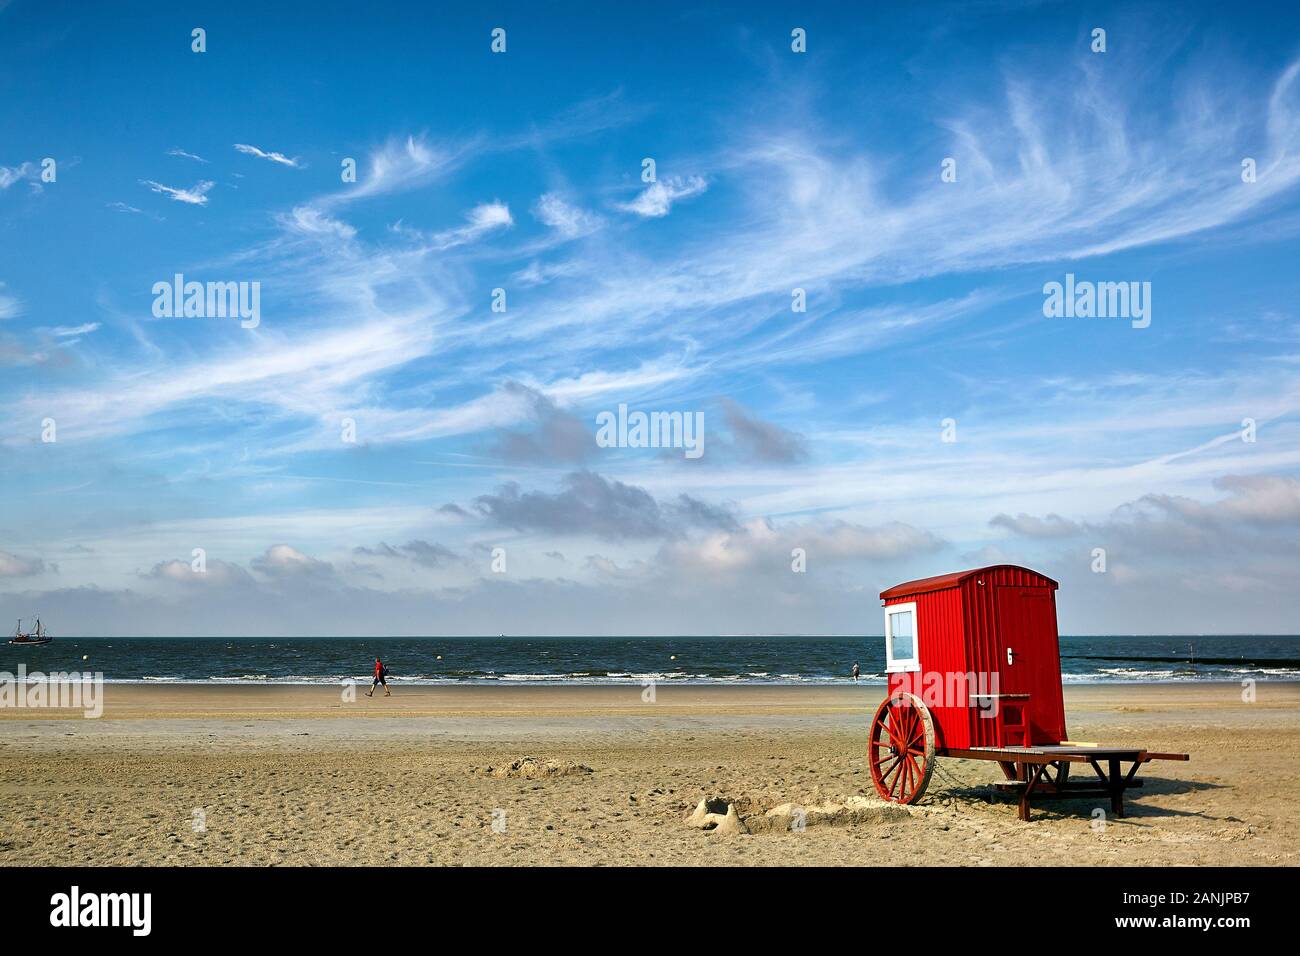 Red-painted wooden beach changing cabin on wheels at Borkum south beach with cirrus clouds forming in the sky Stock Photo